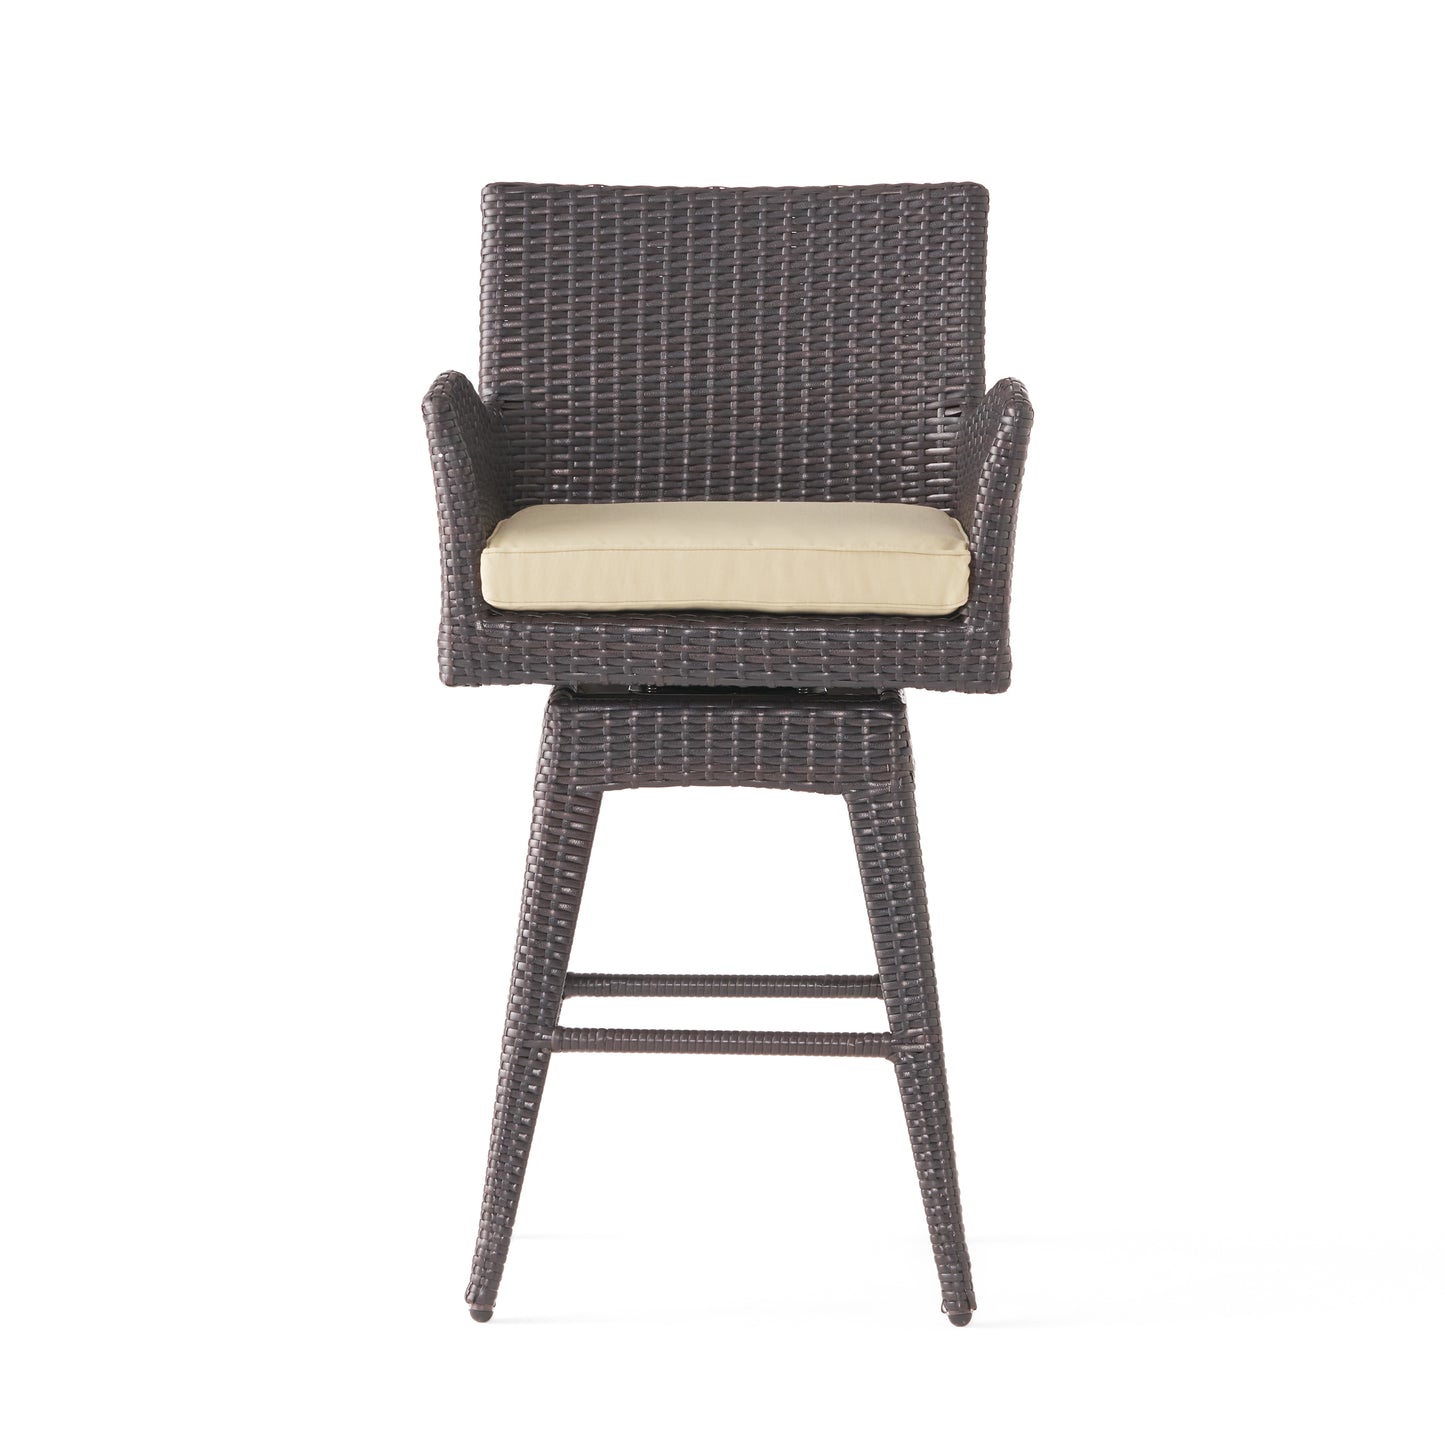 Royer Modern Outdoor Multi-Brown Wicker Swivel Barstool with Tapered Legs